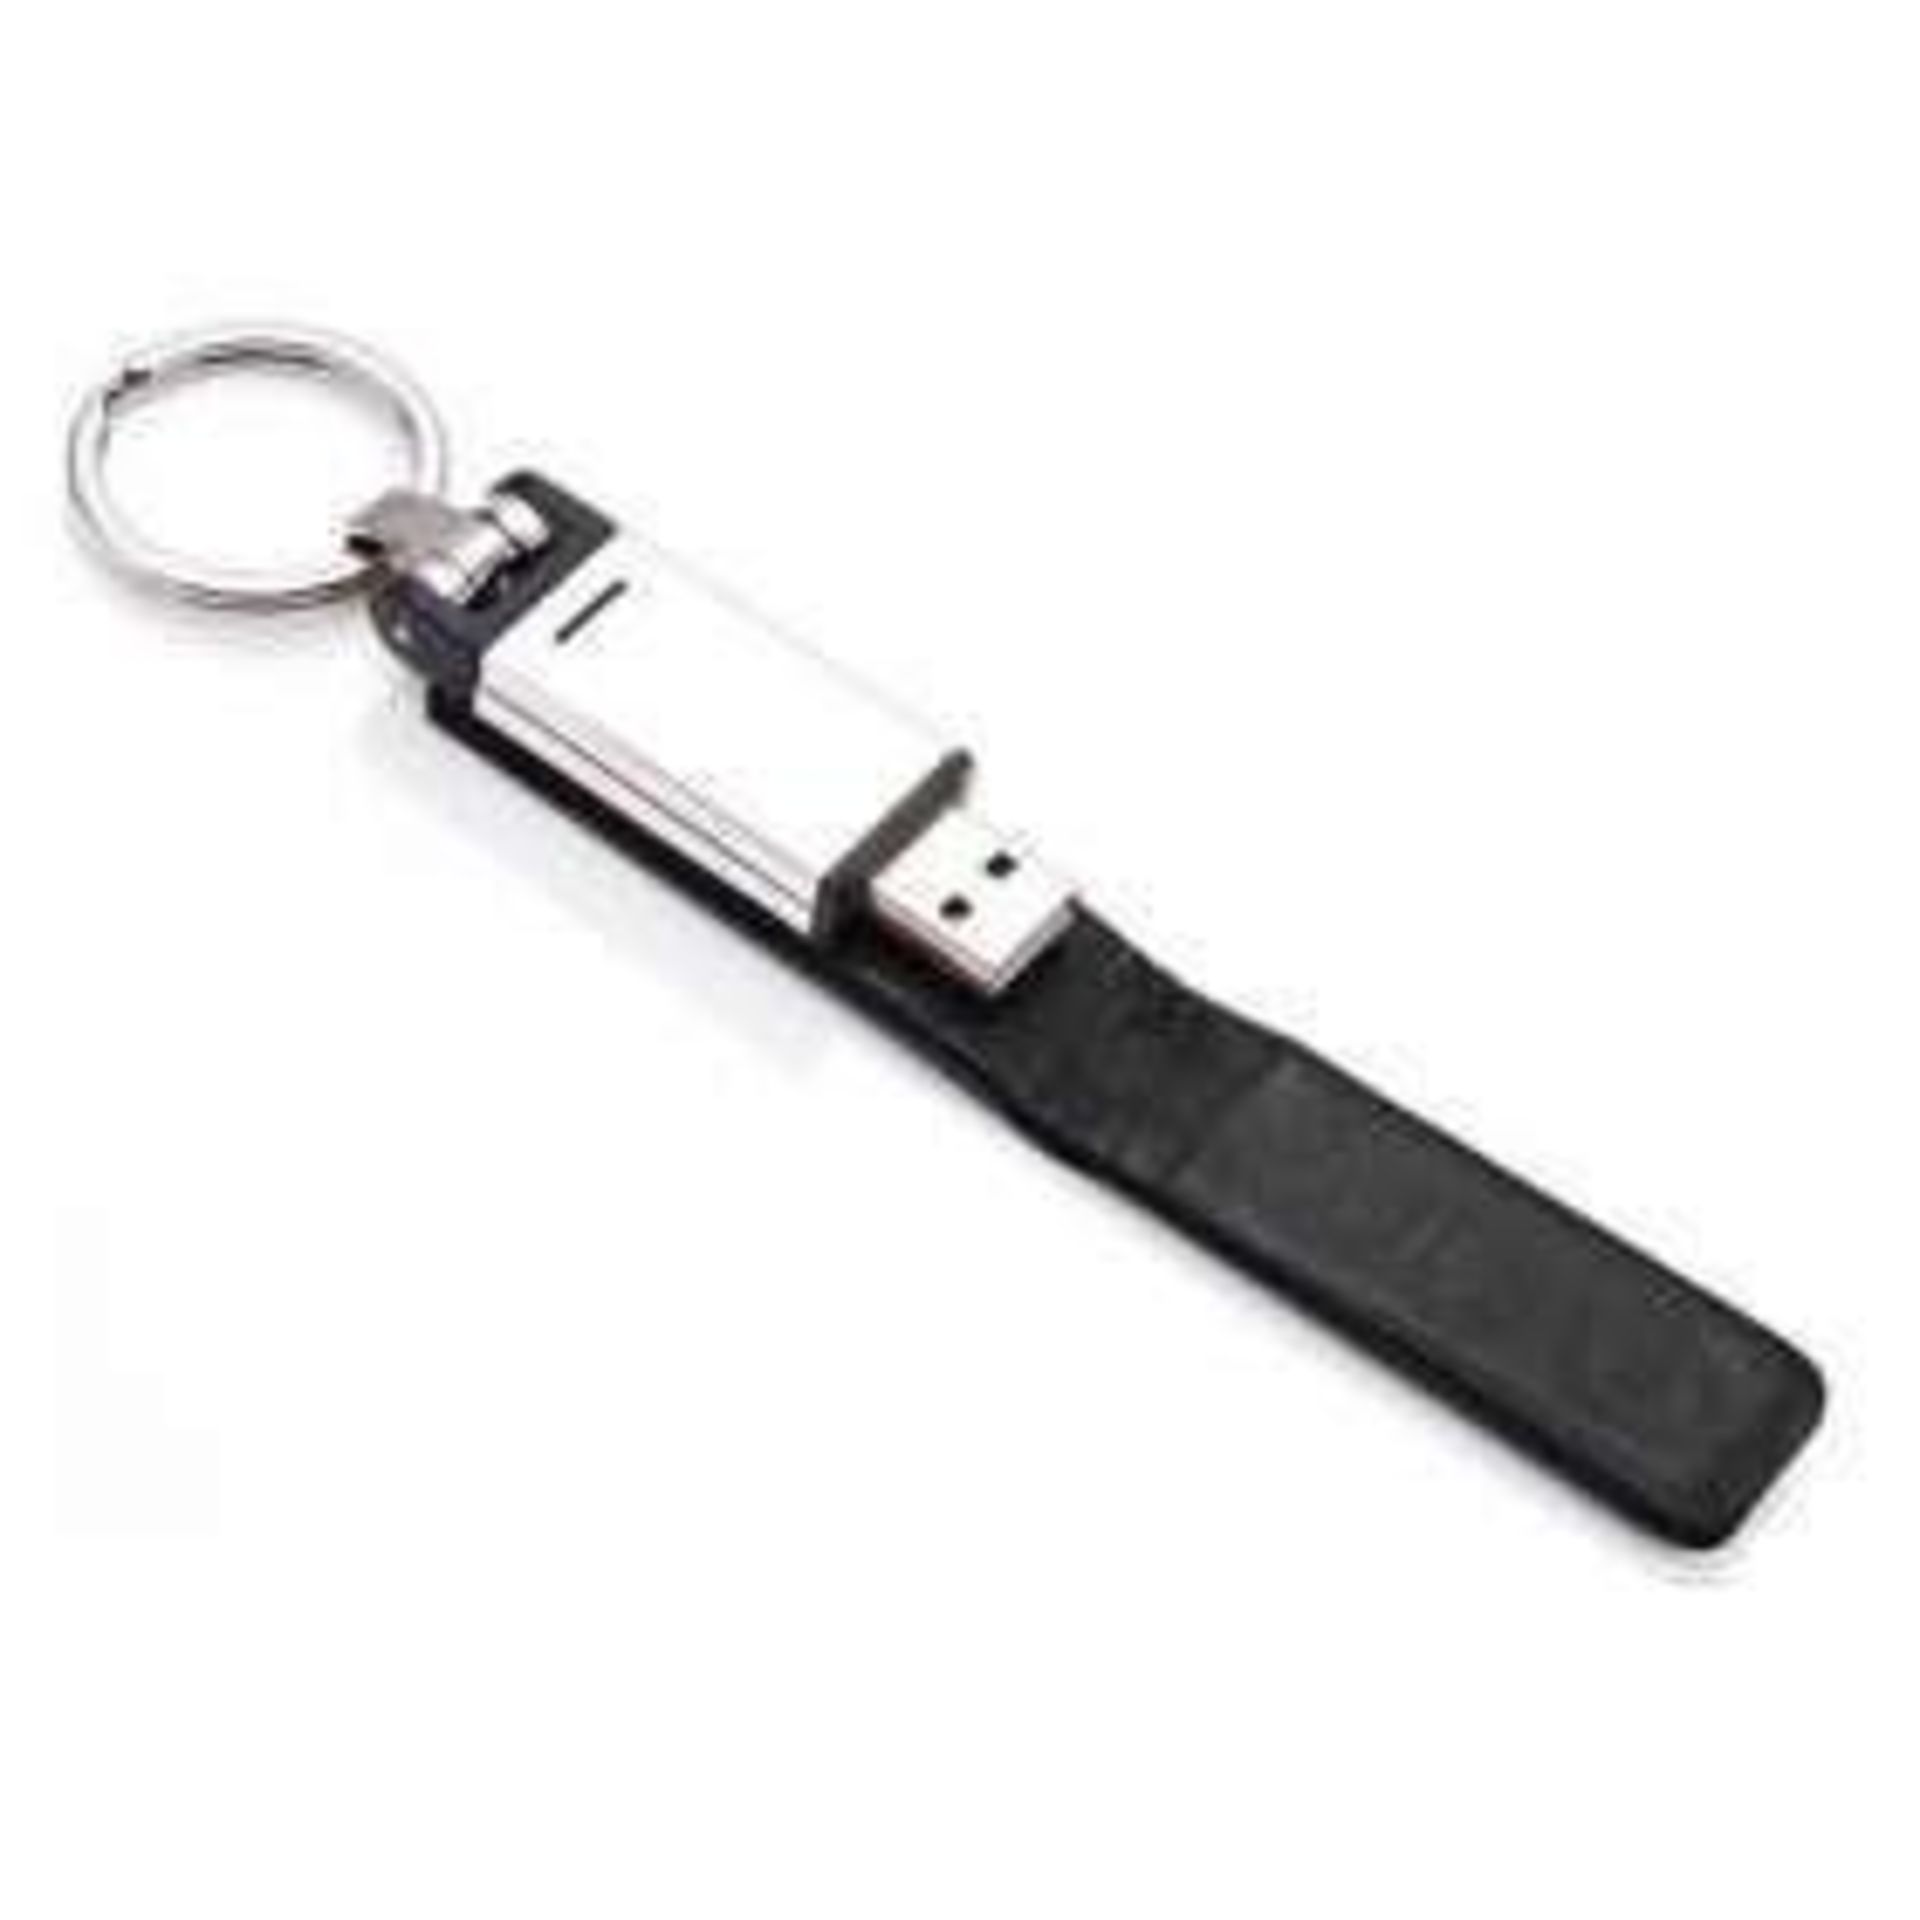 1 x ICE London Silver Plated 2GB USB Flashdrive Keyring - Features A Genuine Leather Wrap With Magne